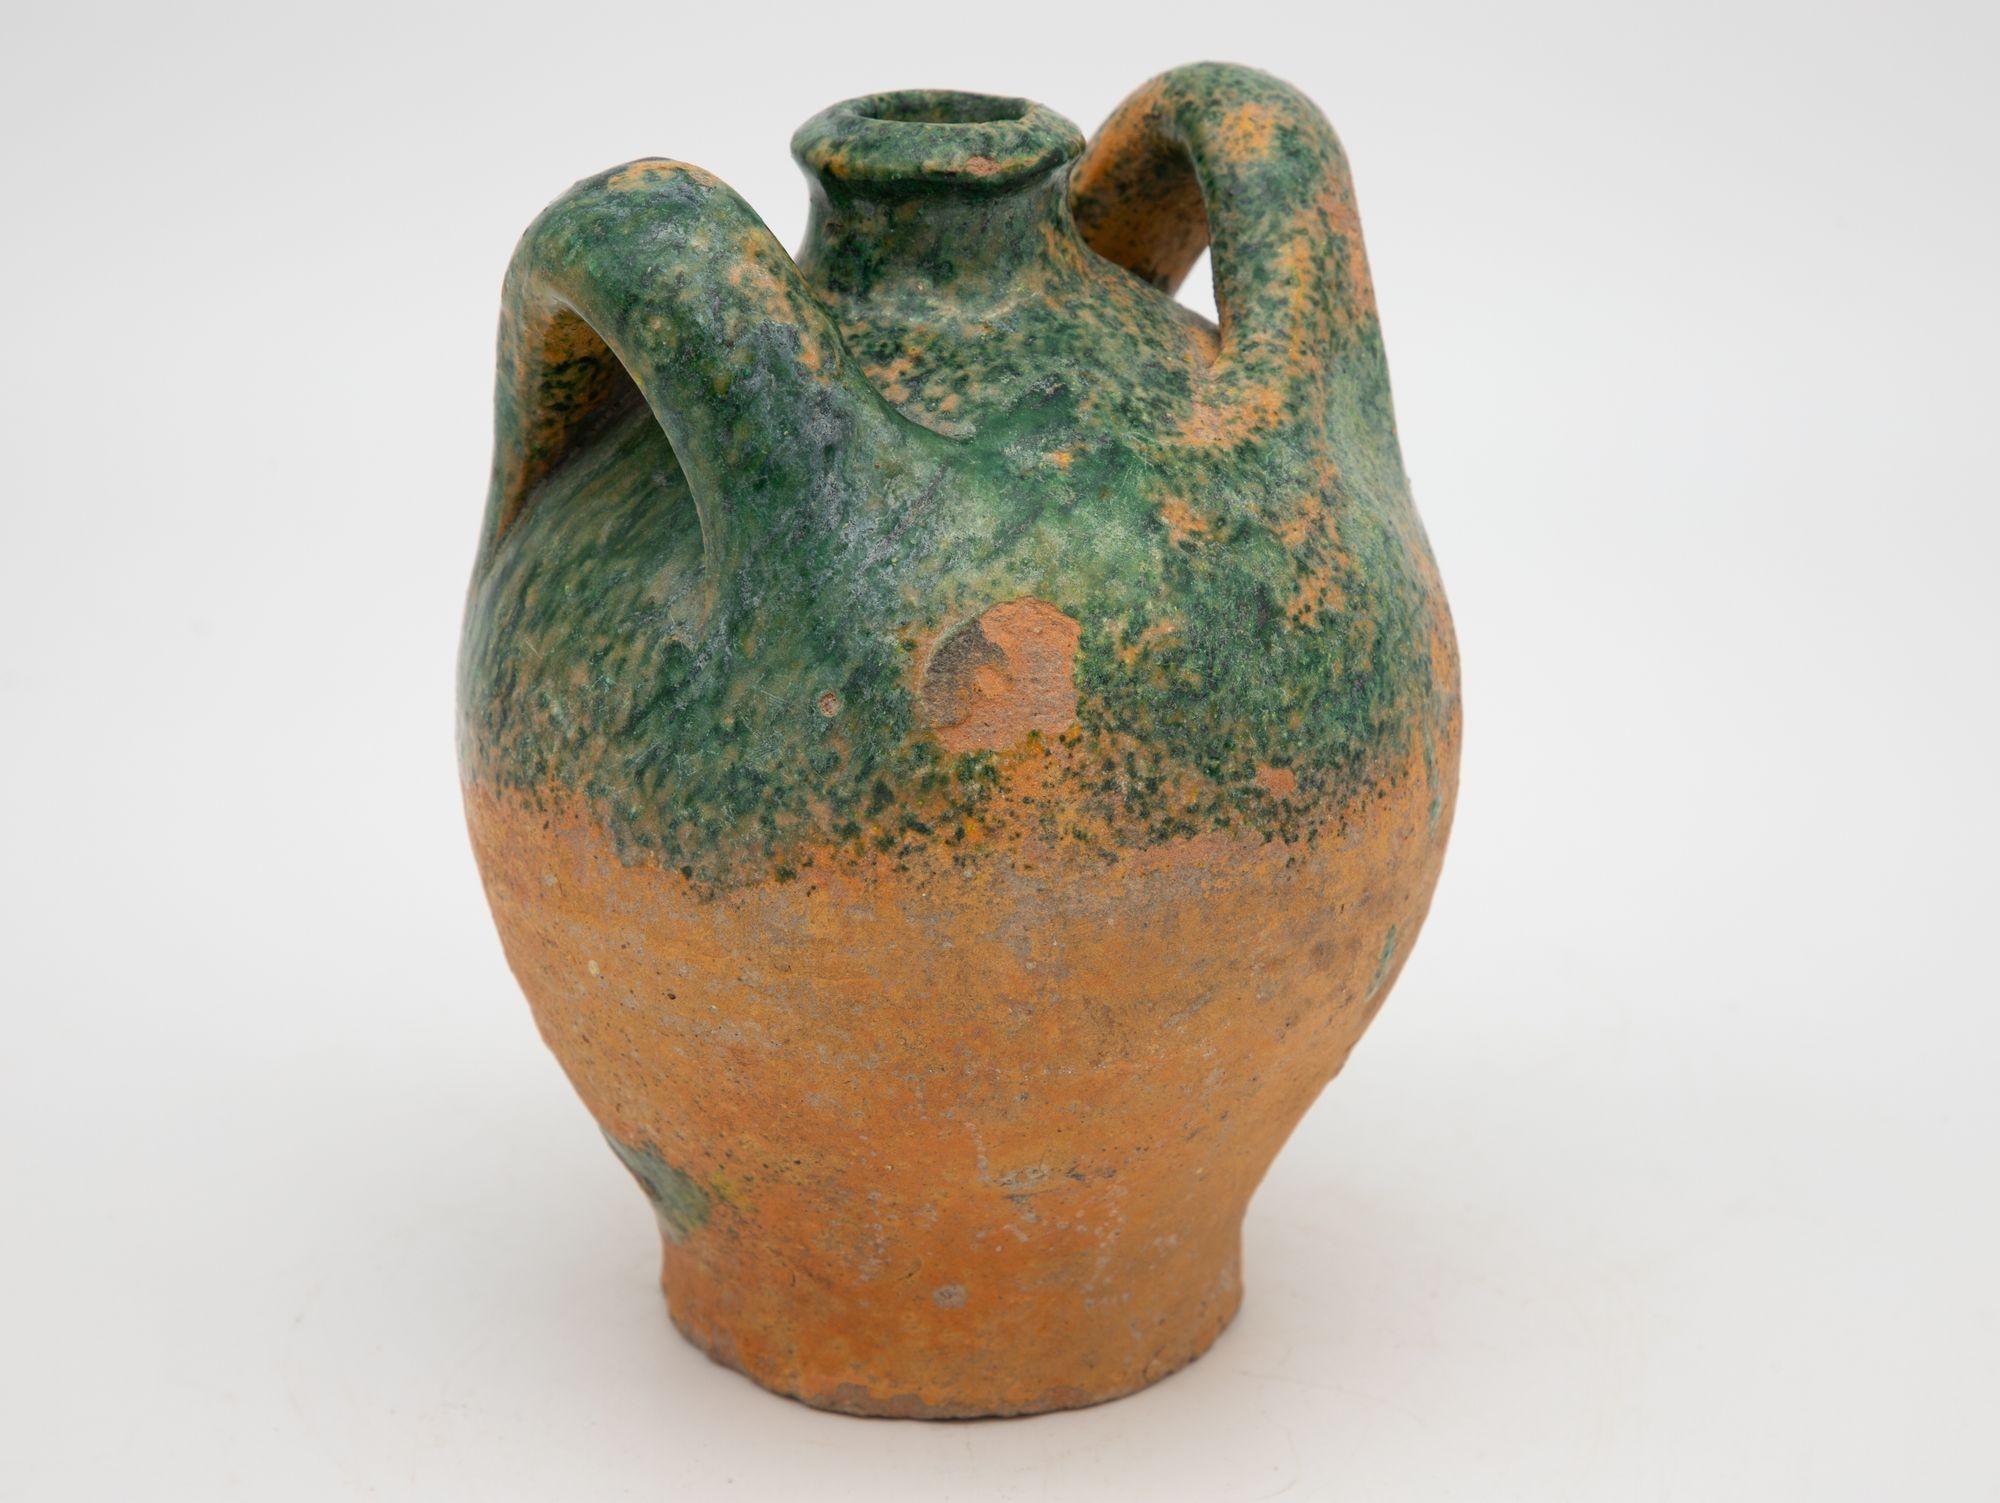 A late 19th century terracotta confit pot from Southwest France. The pot has its original cork and shows two handles with a traditional green glaze. Wear consistent for age and use.